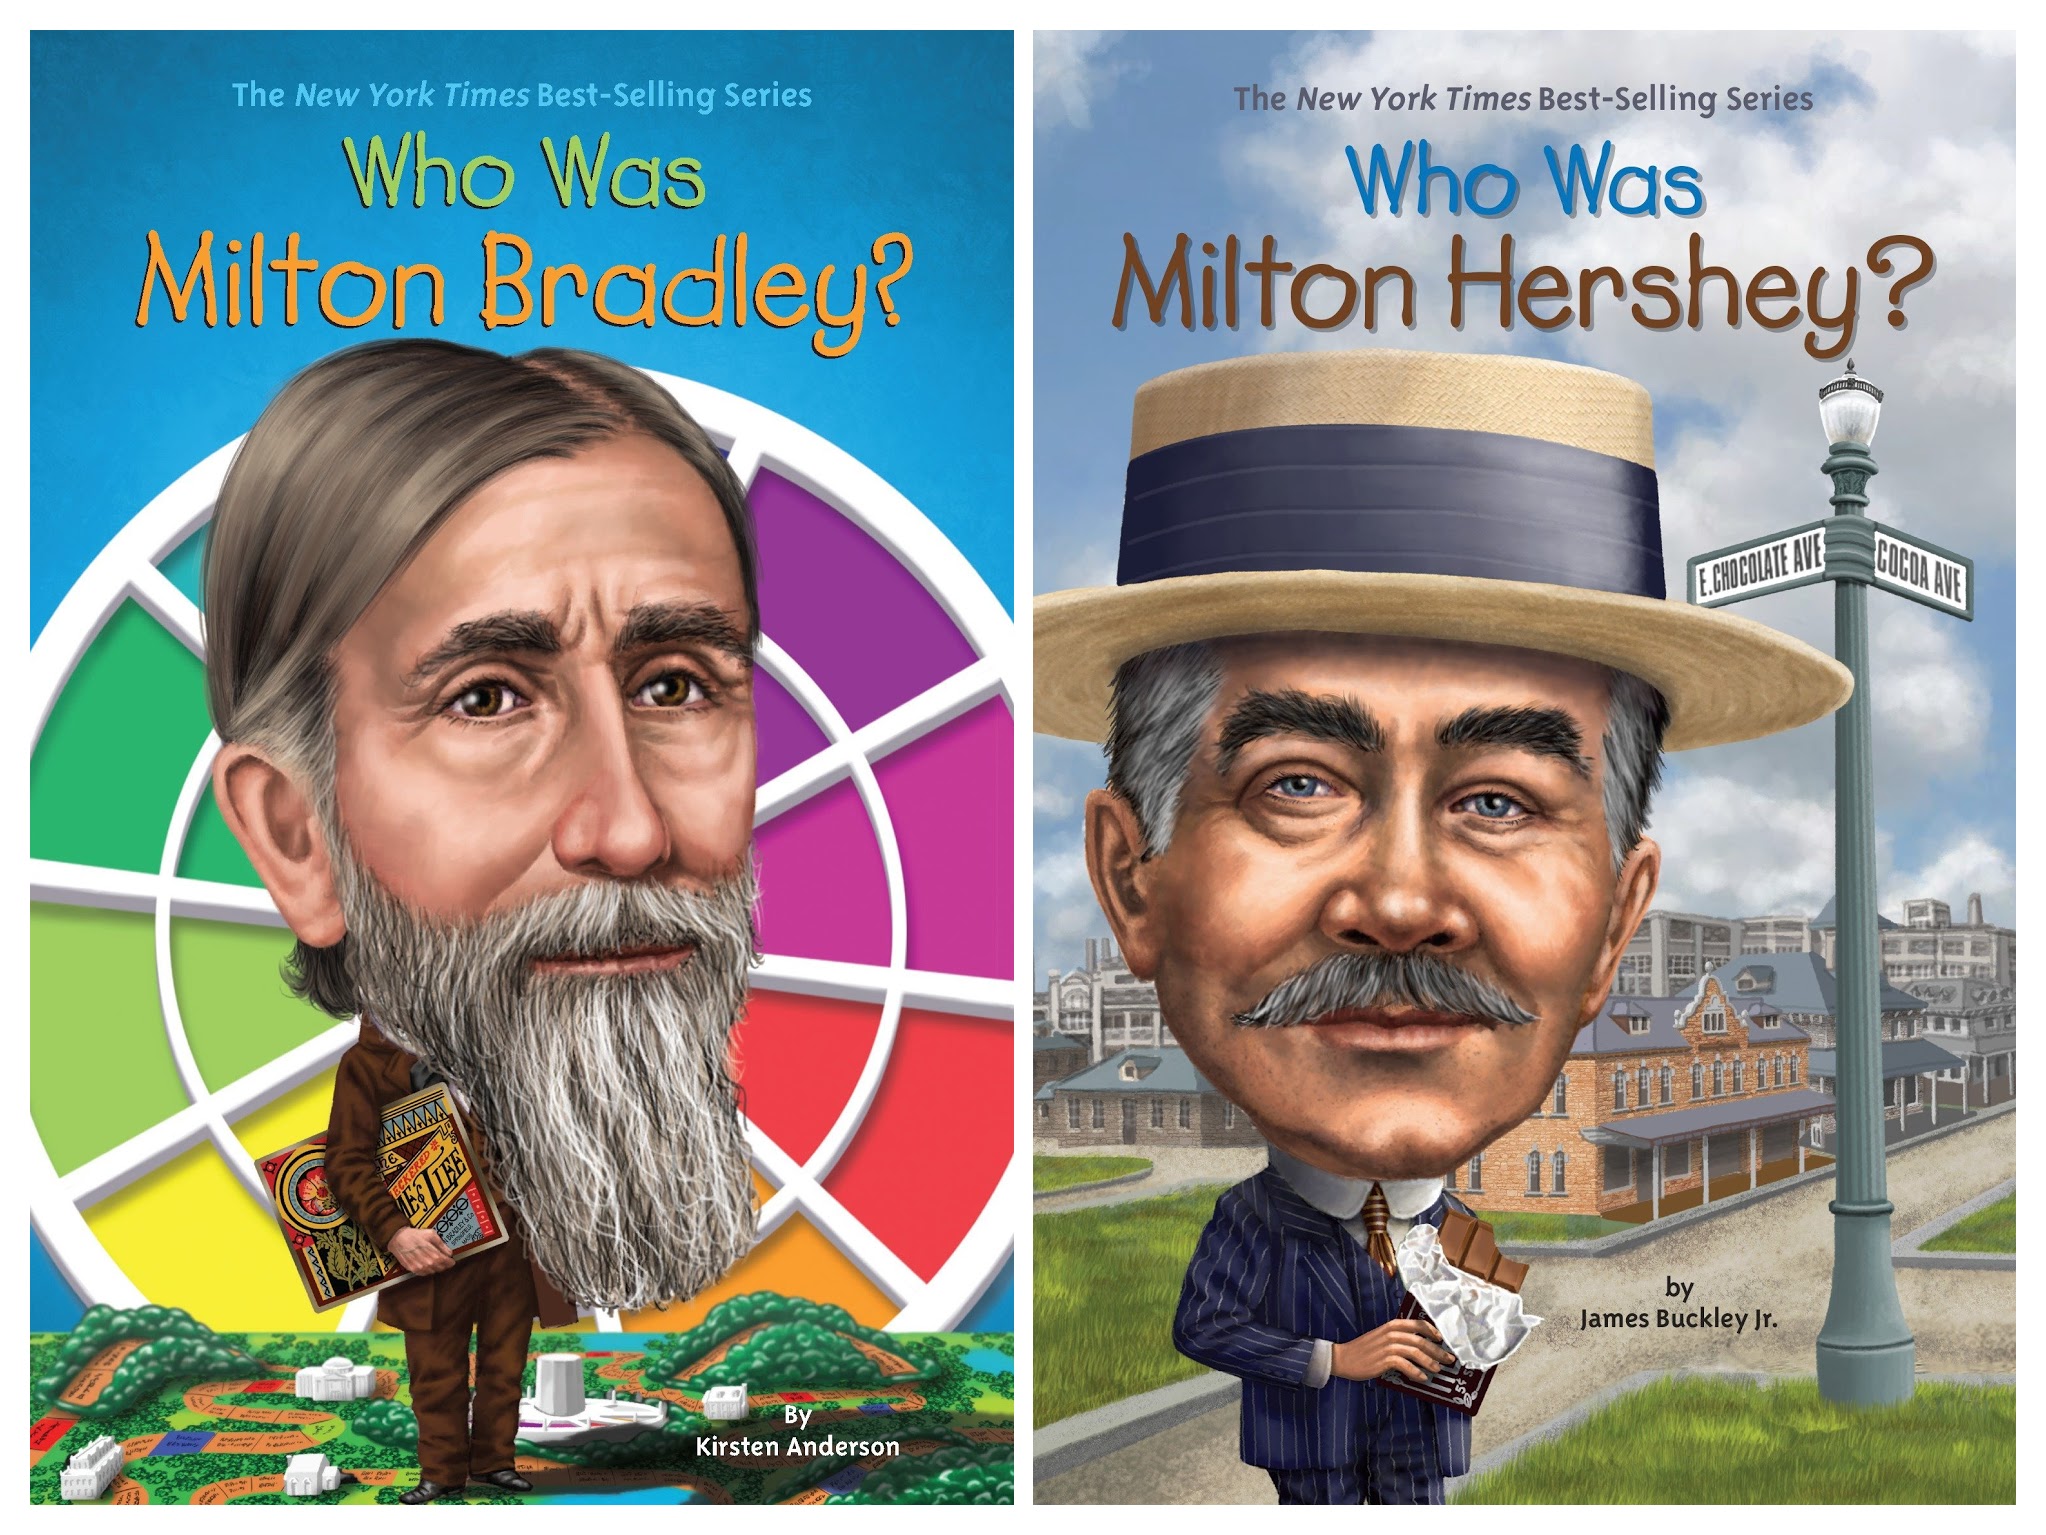 Image of the Who Was Milton Bradley and Who Was Milton Hershey book covers.